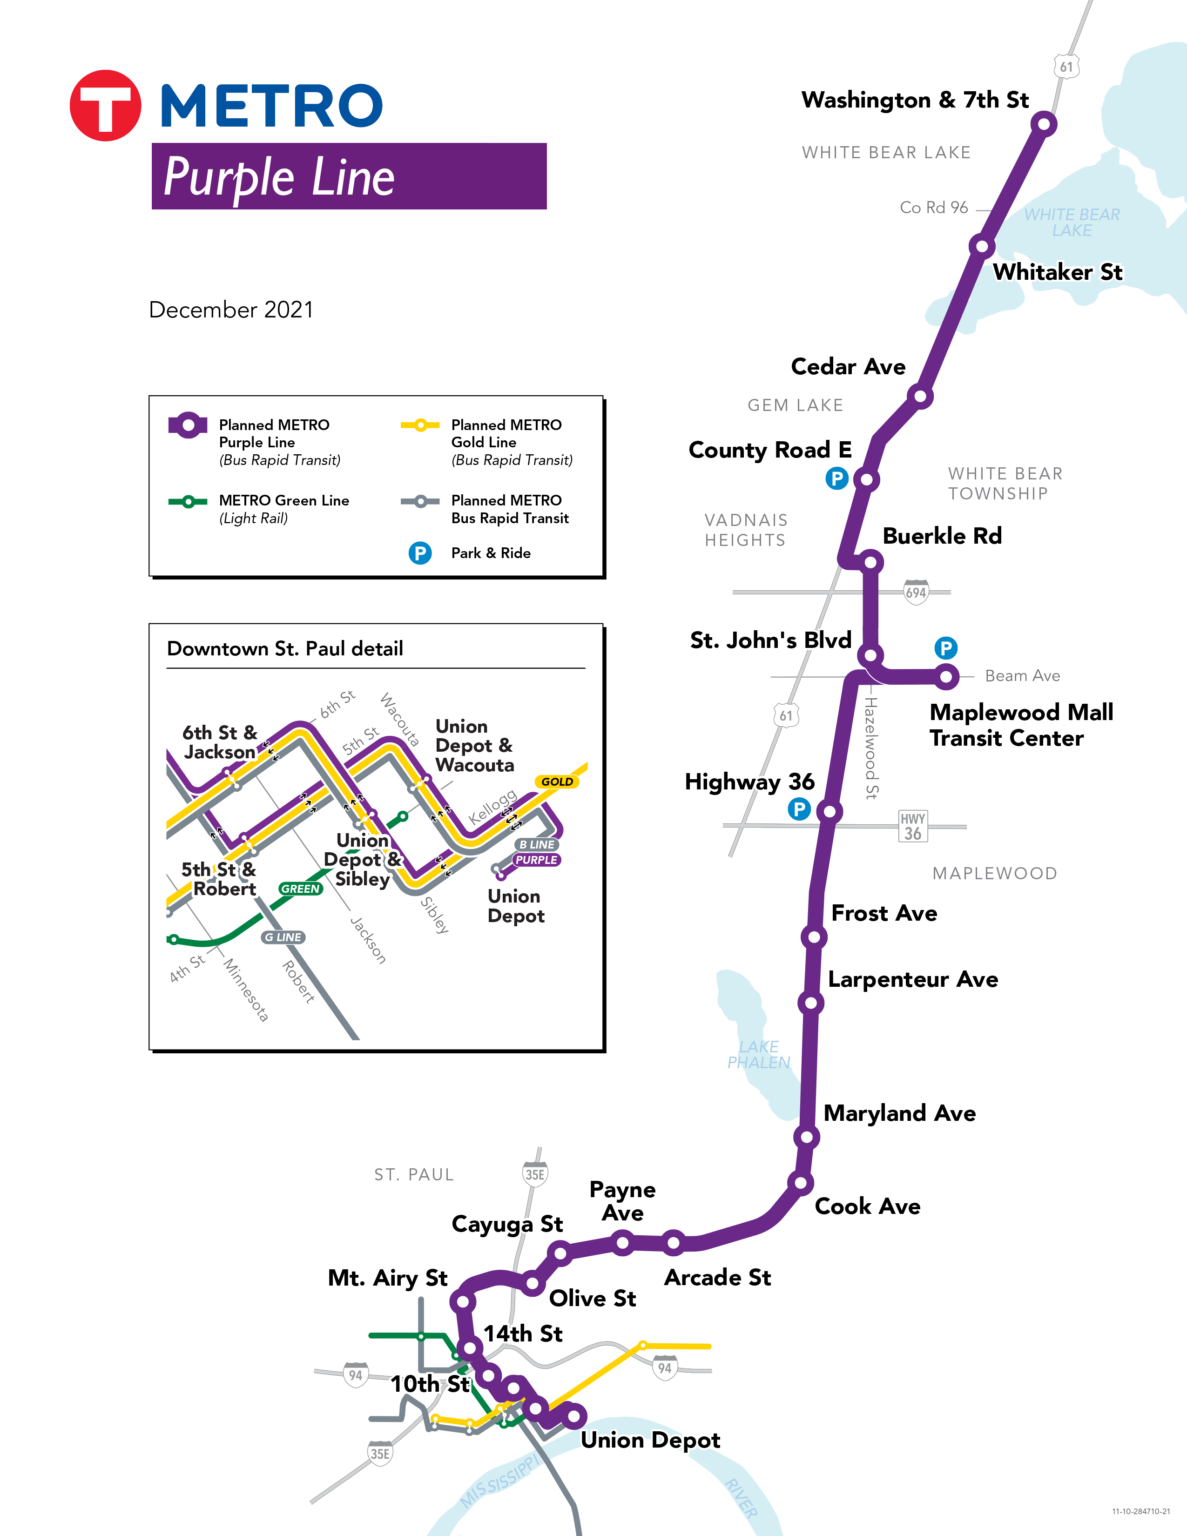 METRO Purple Line Receives Federal Approval in Twin Cities BusNews